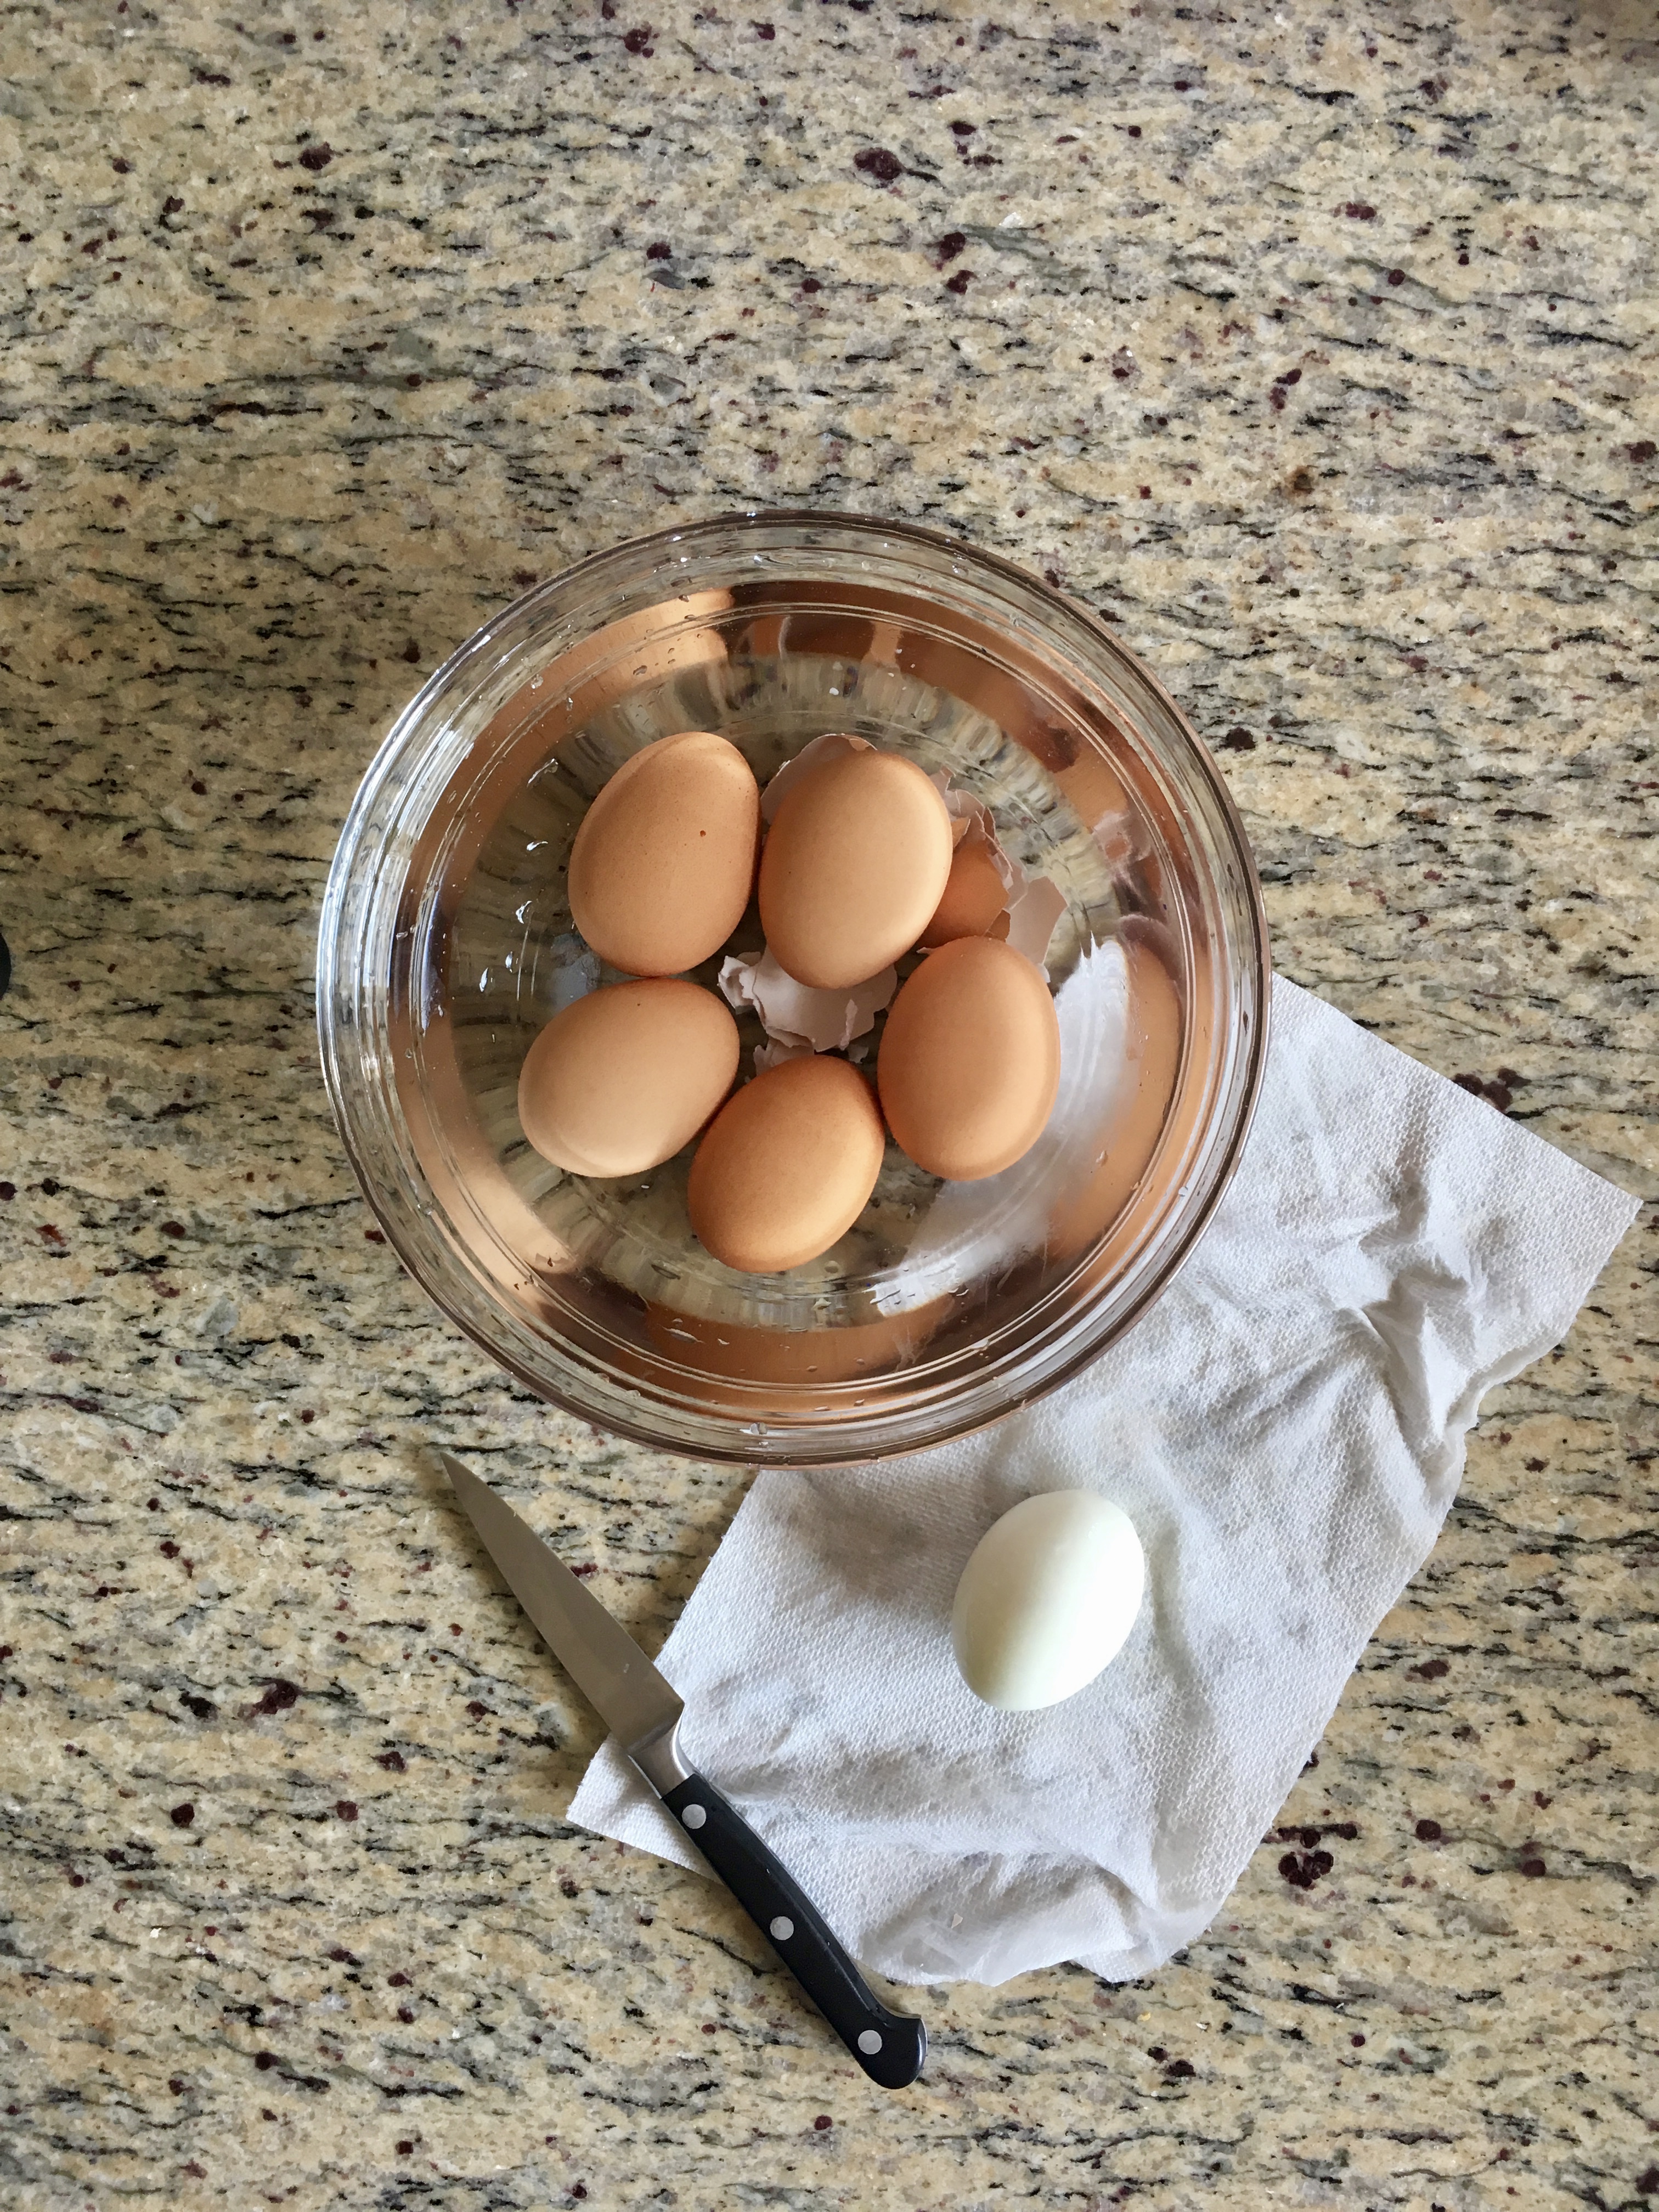 Learn how easy it is to hard boil eggs in 4 simple steps!